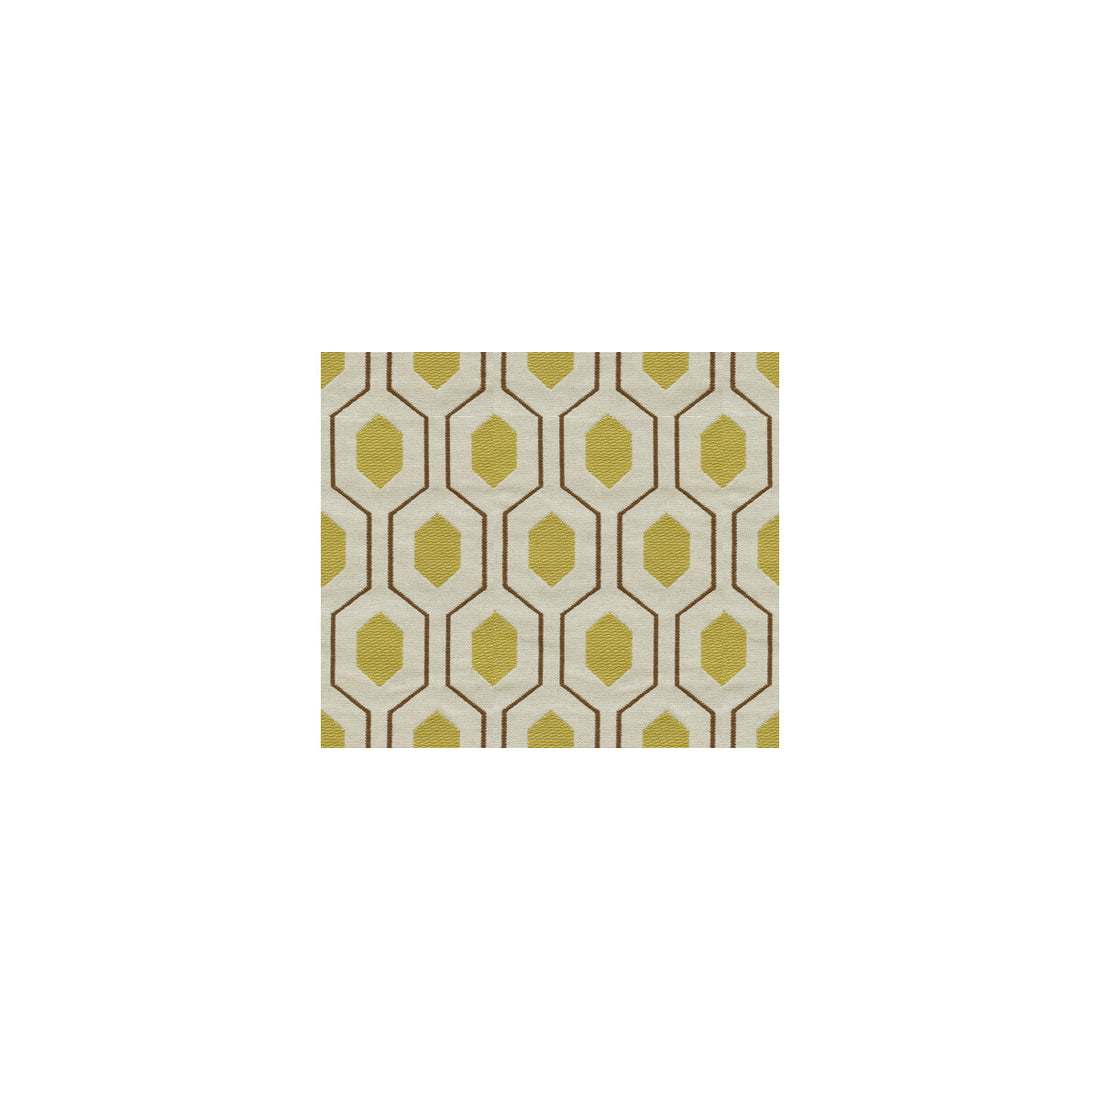 Euclid fabric in citron color - pattern 30767.416.0 - by Kravet Basics in the Thom Filicia collection